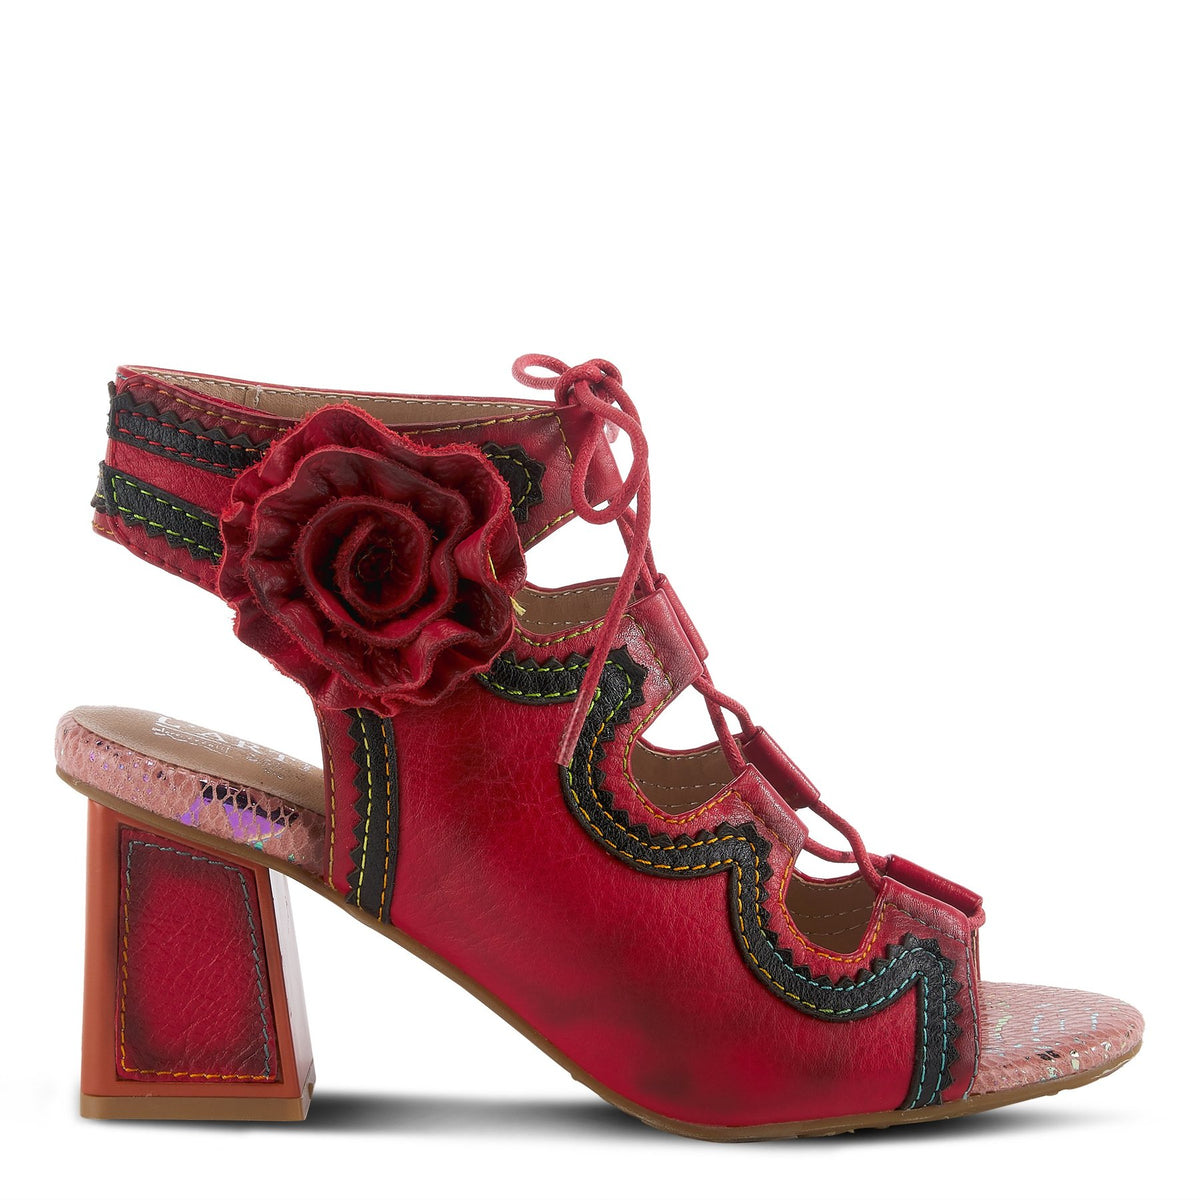 French inspired, hand-painted burnished leather ghillie sandal by L'Artiste Springstep Footwear featuring a hook and loop closure ankle strap with a decorative flower, rainbow stitching and waxed cotton laces on an architectural block hee